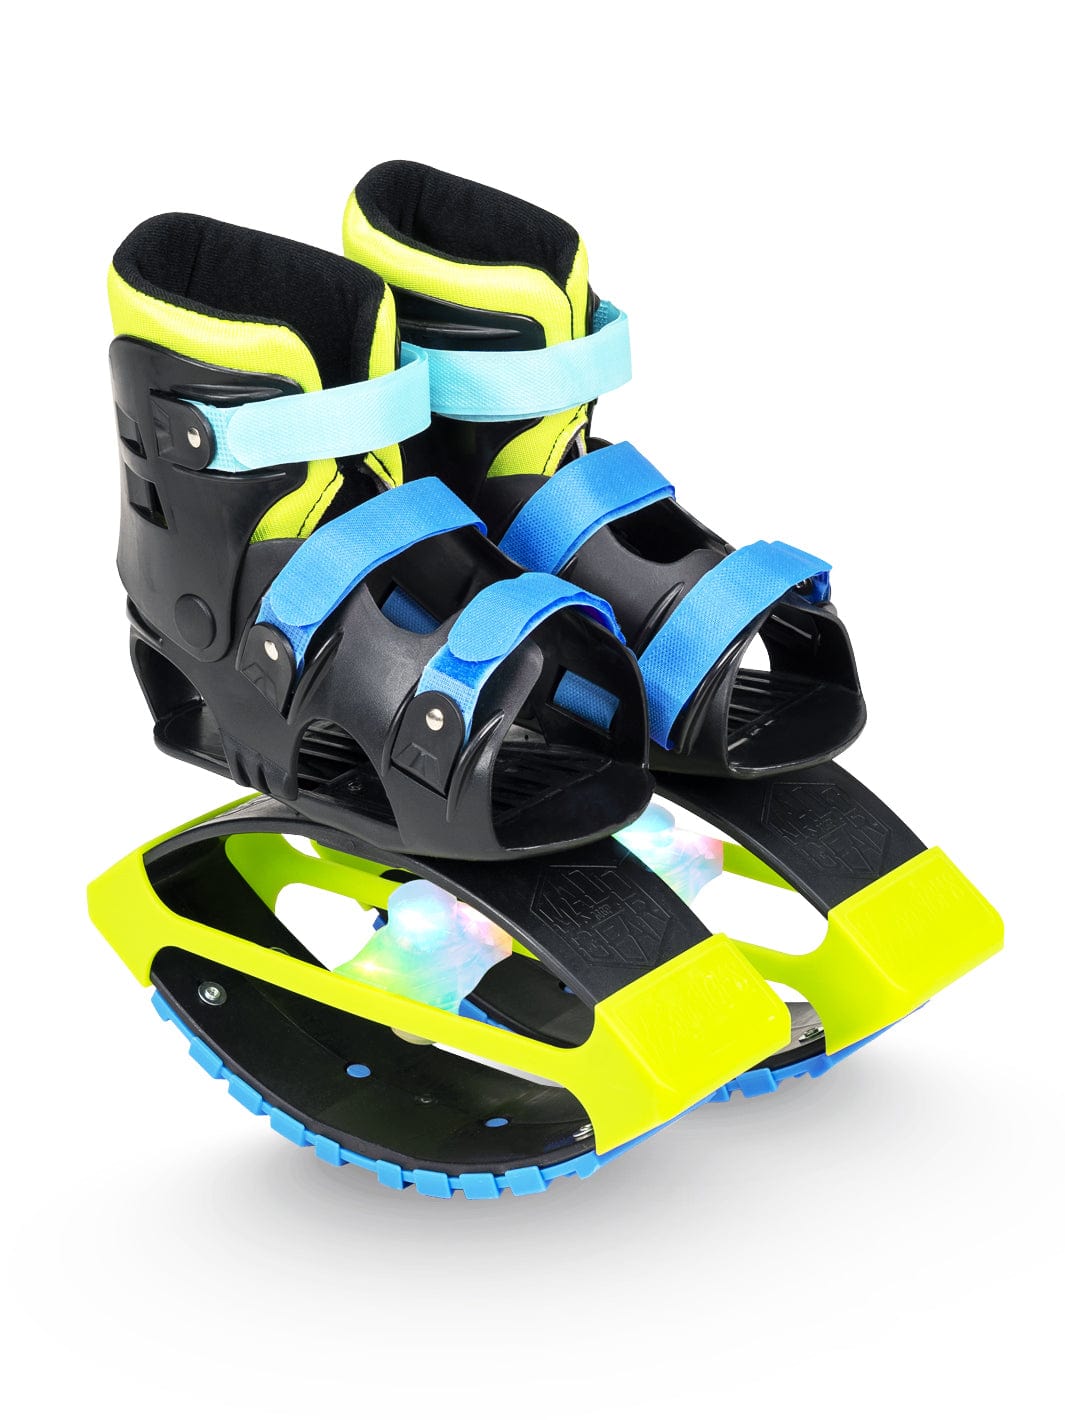 Madd Light-Up Boost Boots - Blue Lime - Madd Gear Global | Est 2002